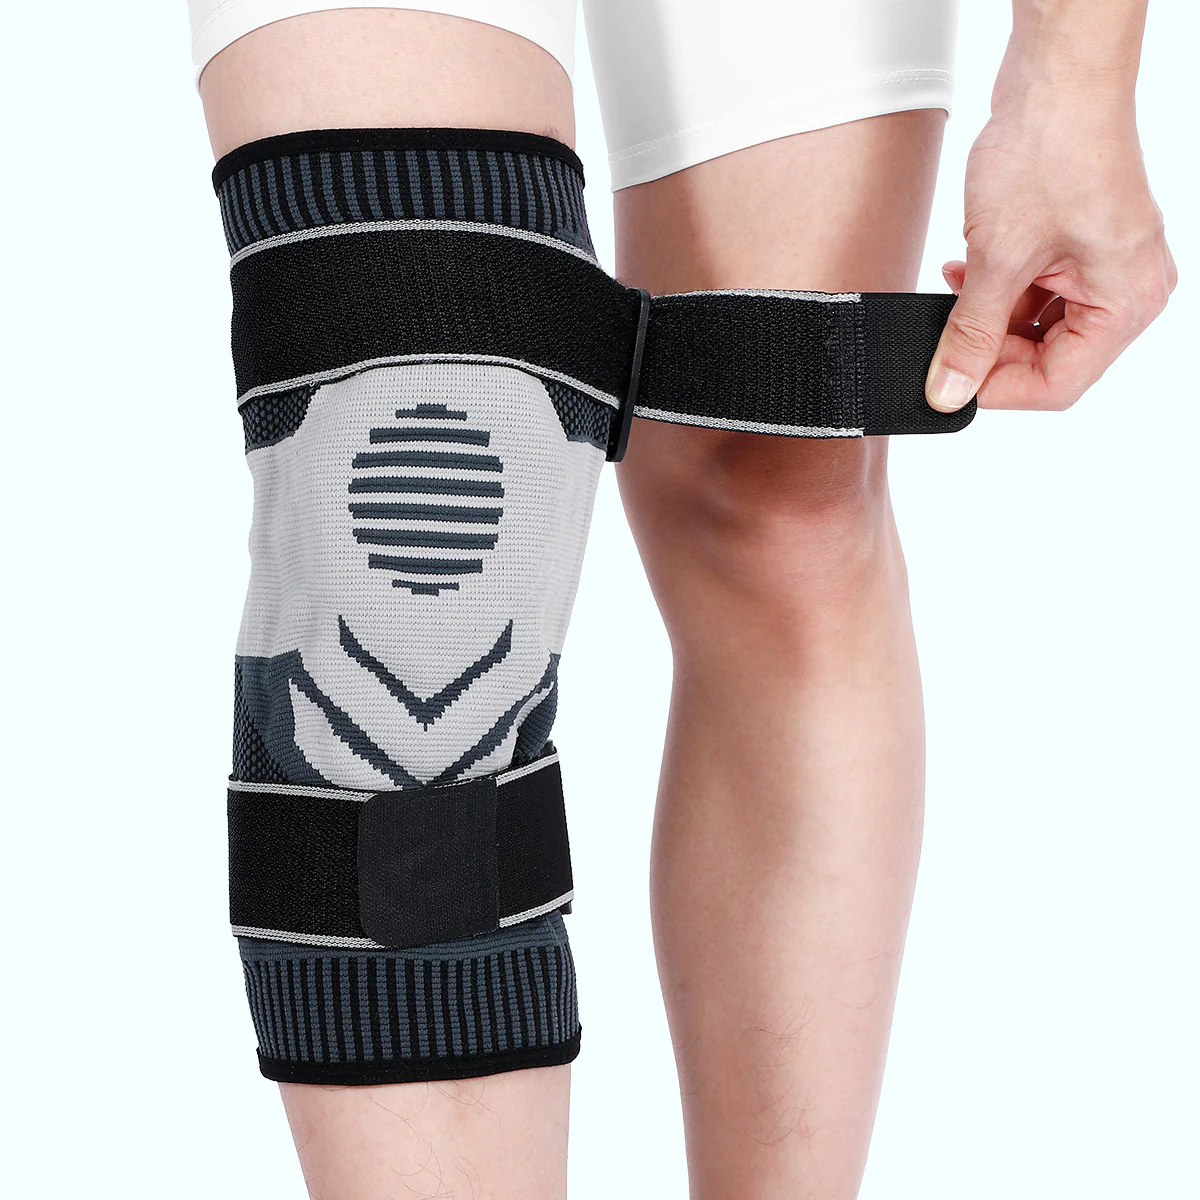 Stay Active and Injury-Free: Discover the Benefits of Fivali Knee Brace for Stability and Running